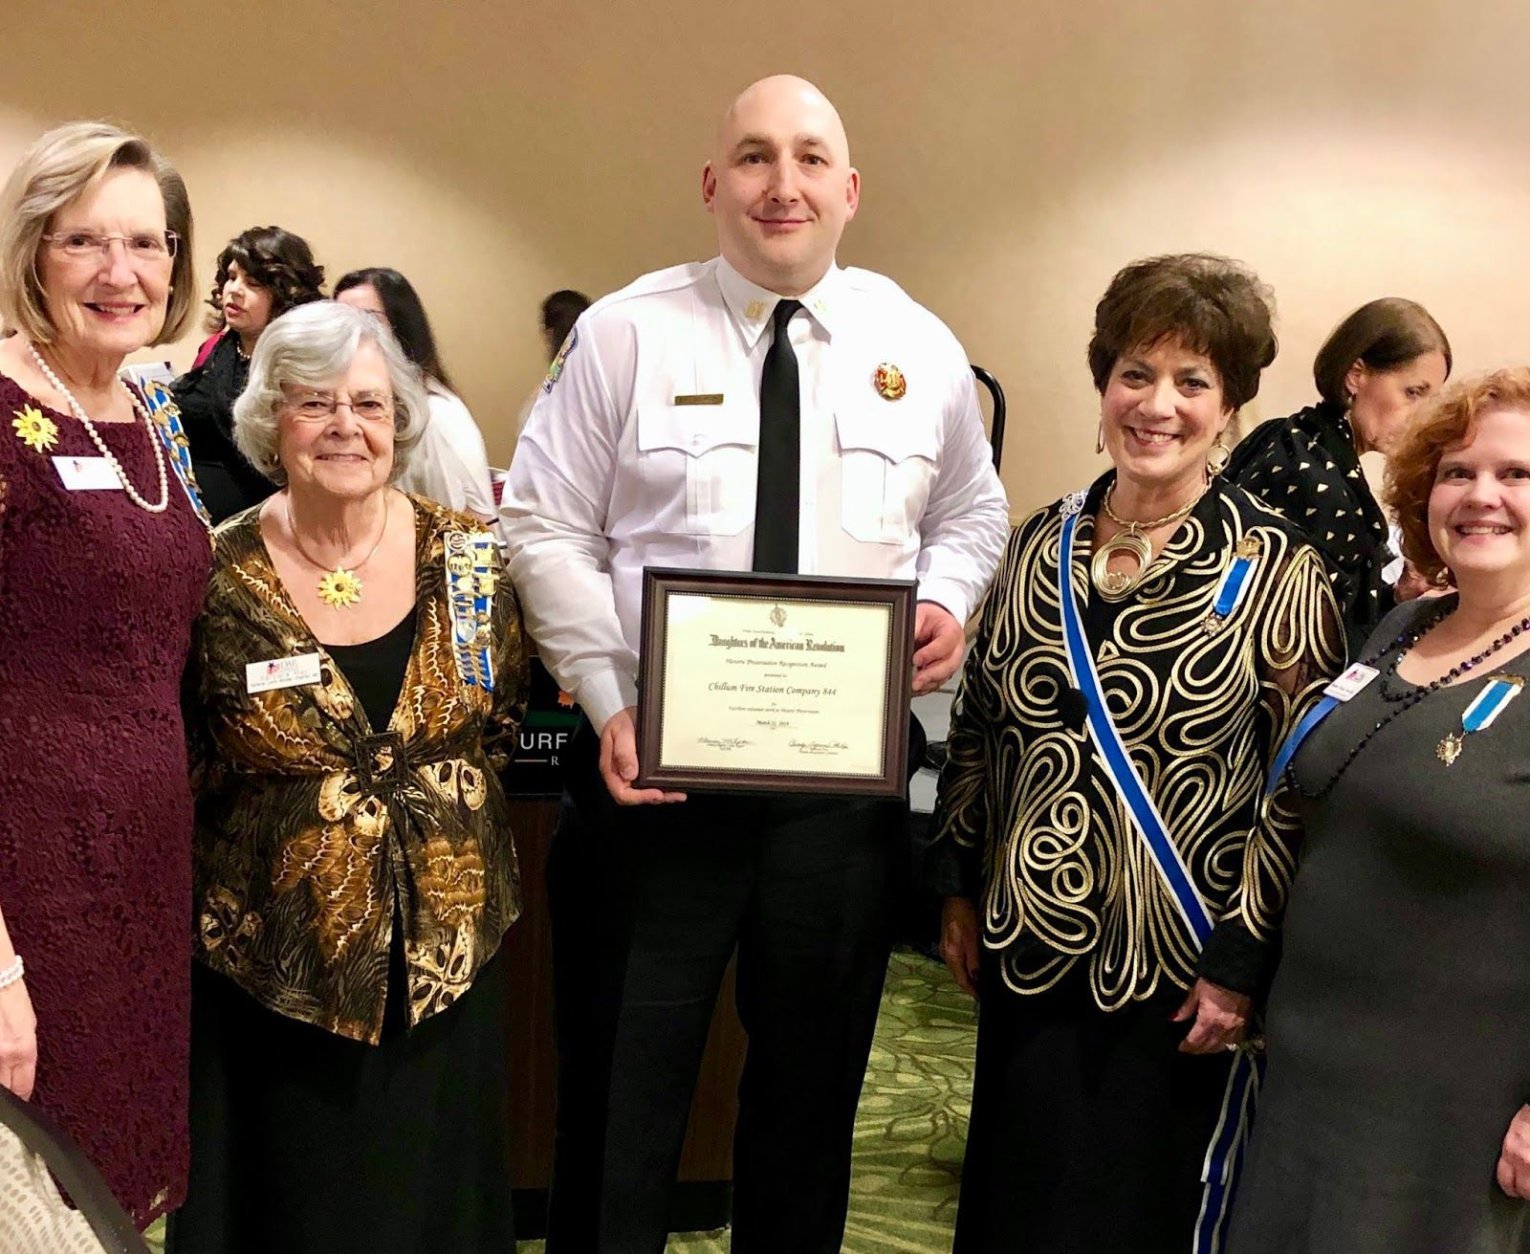 Pat Arata, Barbara May, Captain Ushinski, DAR State Regent Maureen Tipton and Susan Finkle Sourlis at the ceremony. (Courtesy Prince George's County Fire and EMS)